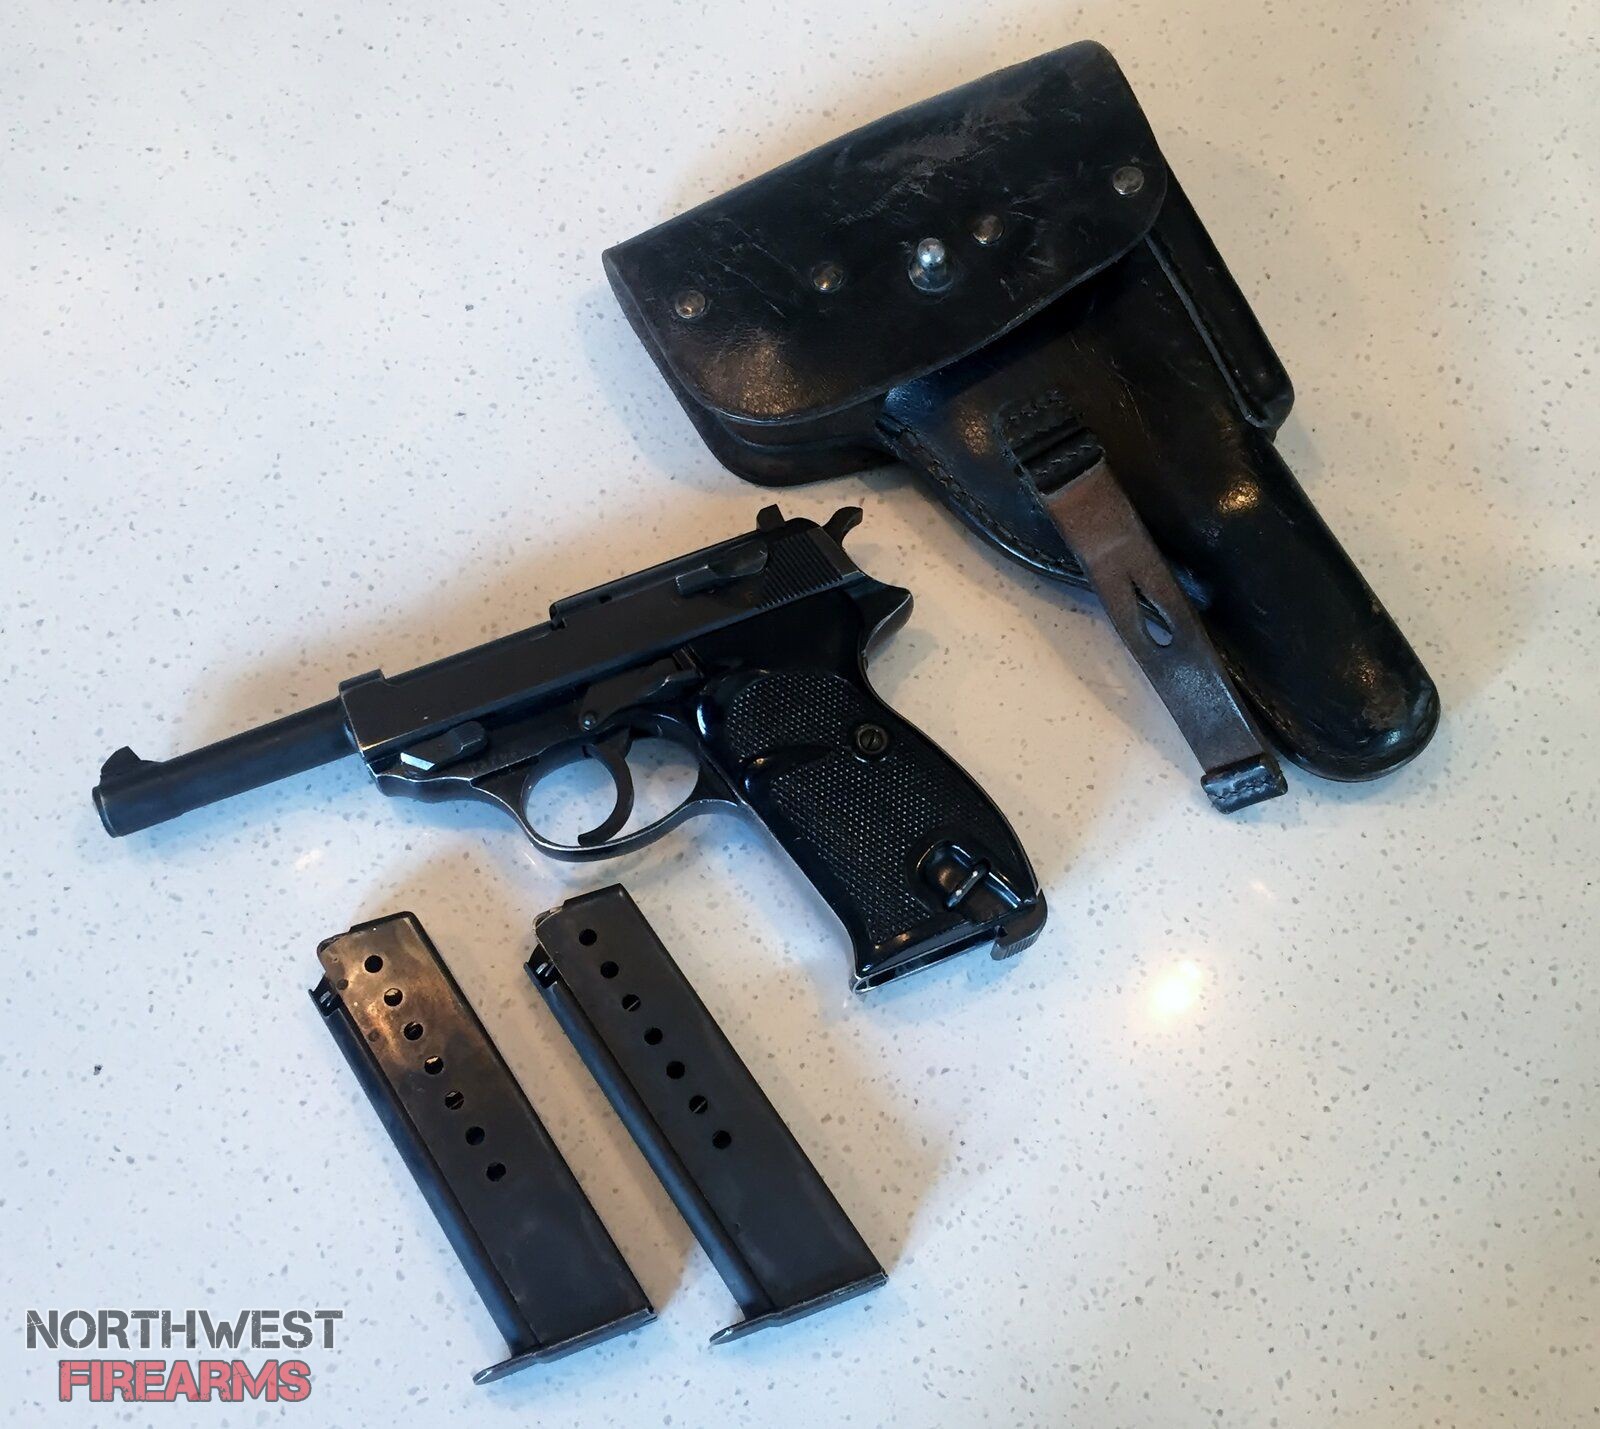 1963 Walther P01 9mm pistol includes 2 magazines & holster | Northwest ...